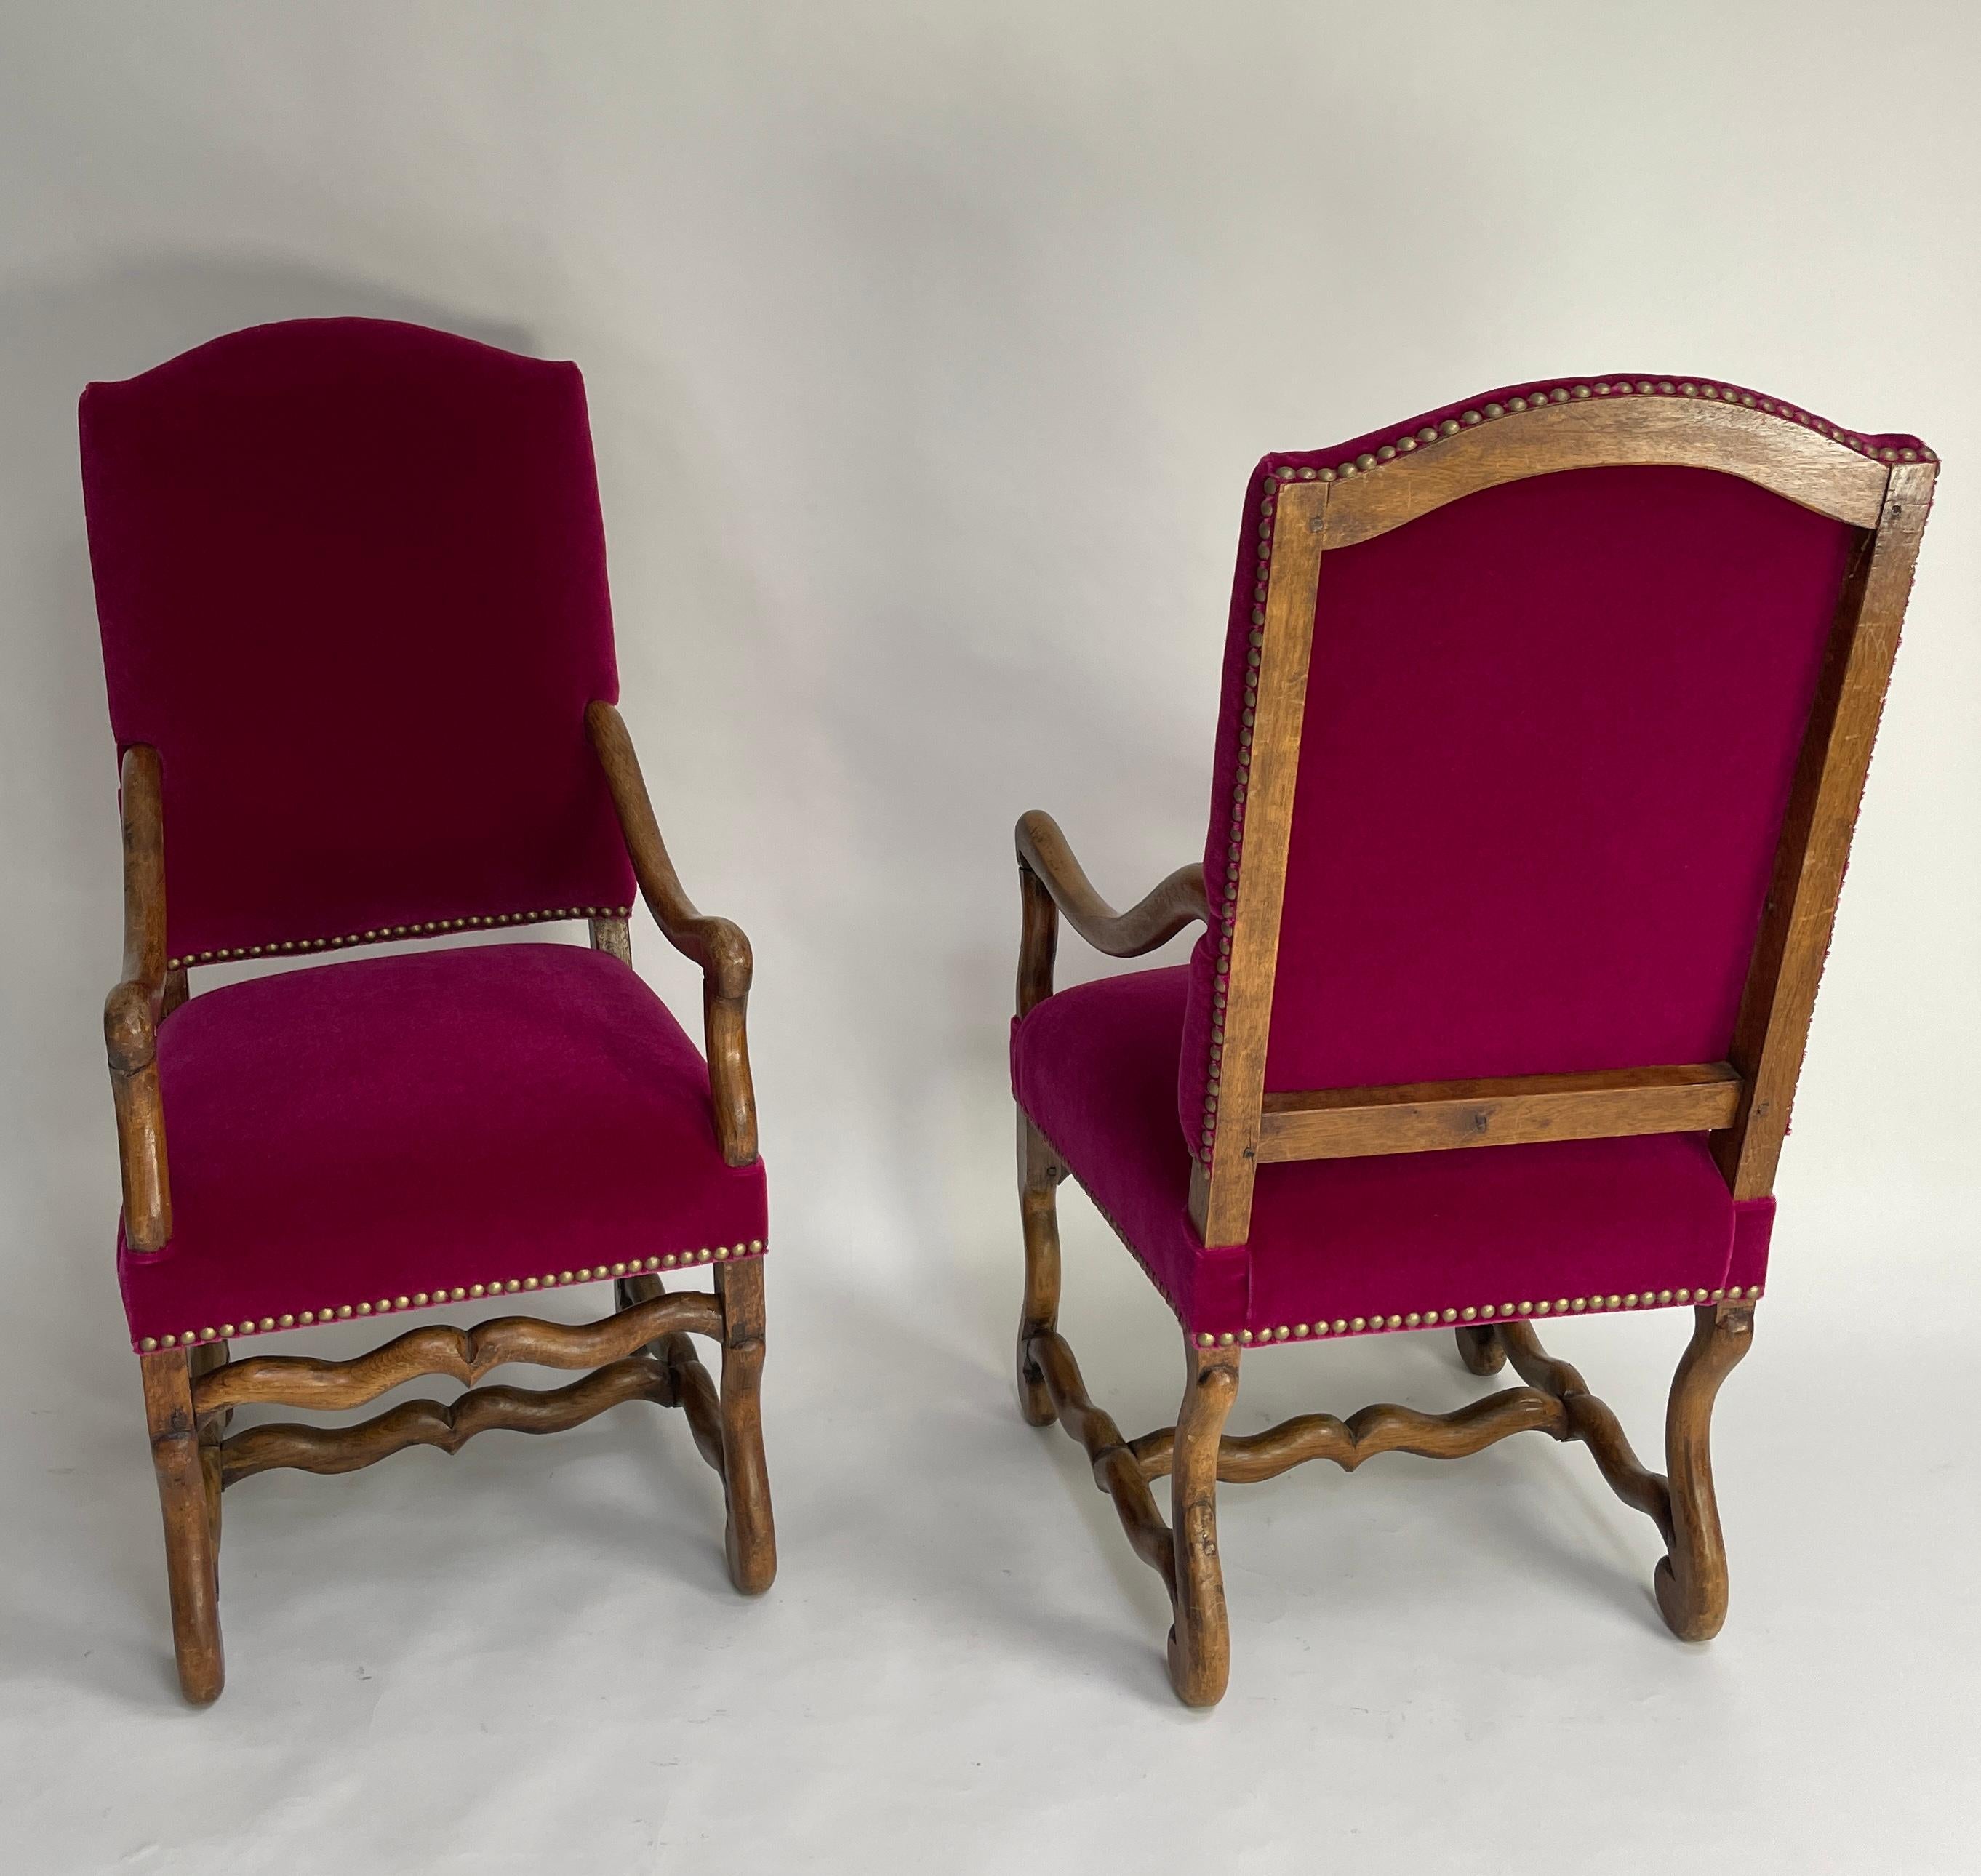 Pair of Os de Mouton arm chair. Louis XIII style. Manufactured around 1890.
Covered with Pierre Frey Mohair.  Chair are located in our NYC showroom.